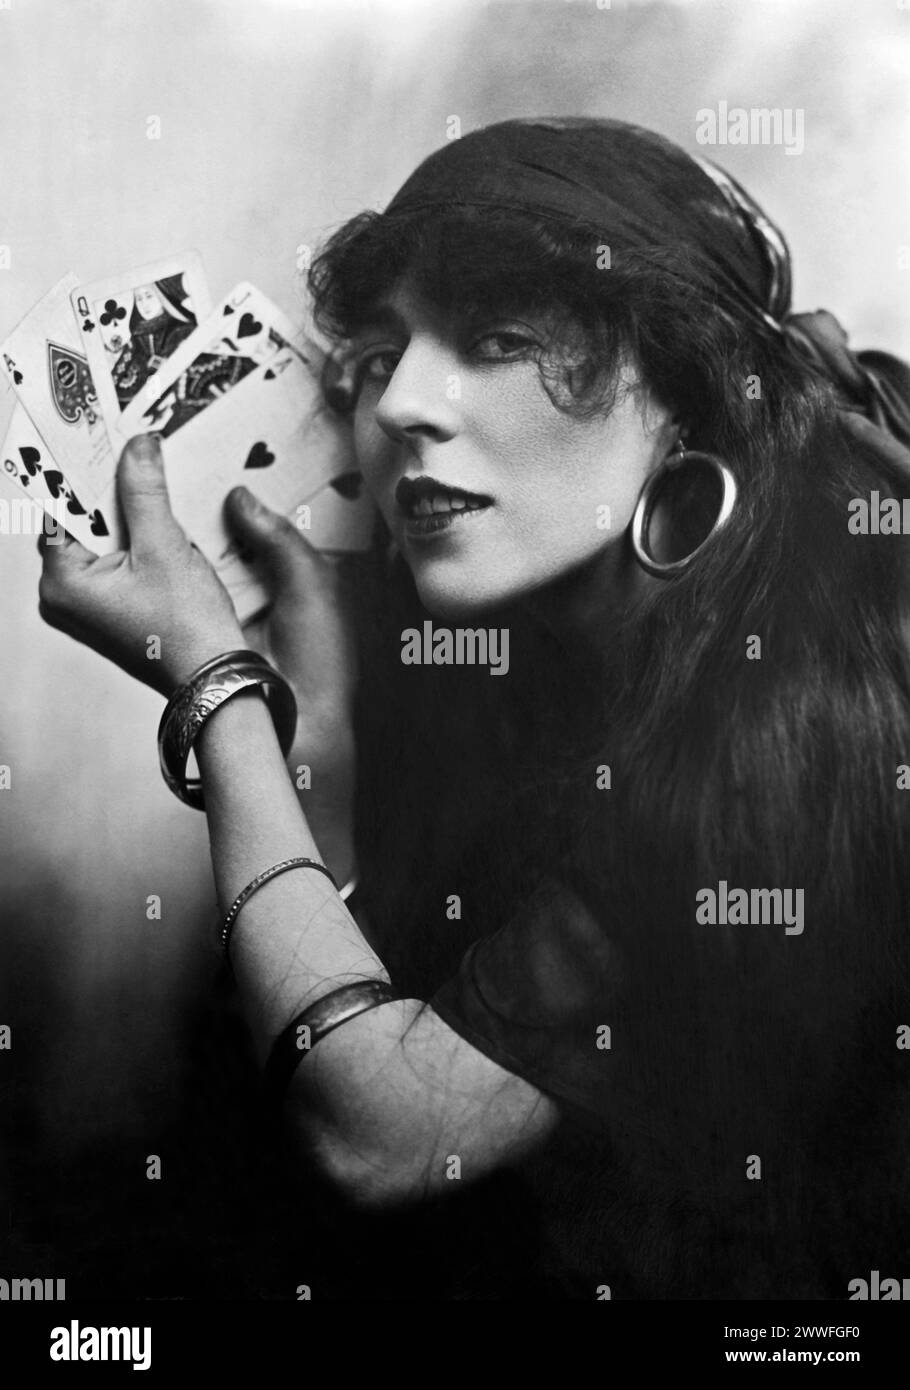 United States   c 1912 Silent film actress Florence Lee appearing as a fortune teller wearing a headscarf with hoop earings, bangles and holding a deck of cards in her hand. Stock Photo